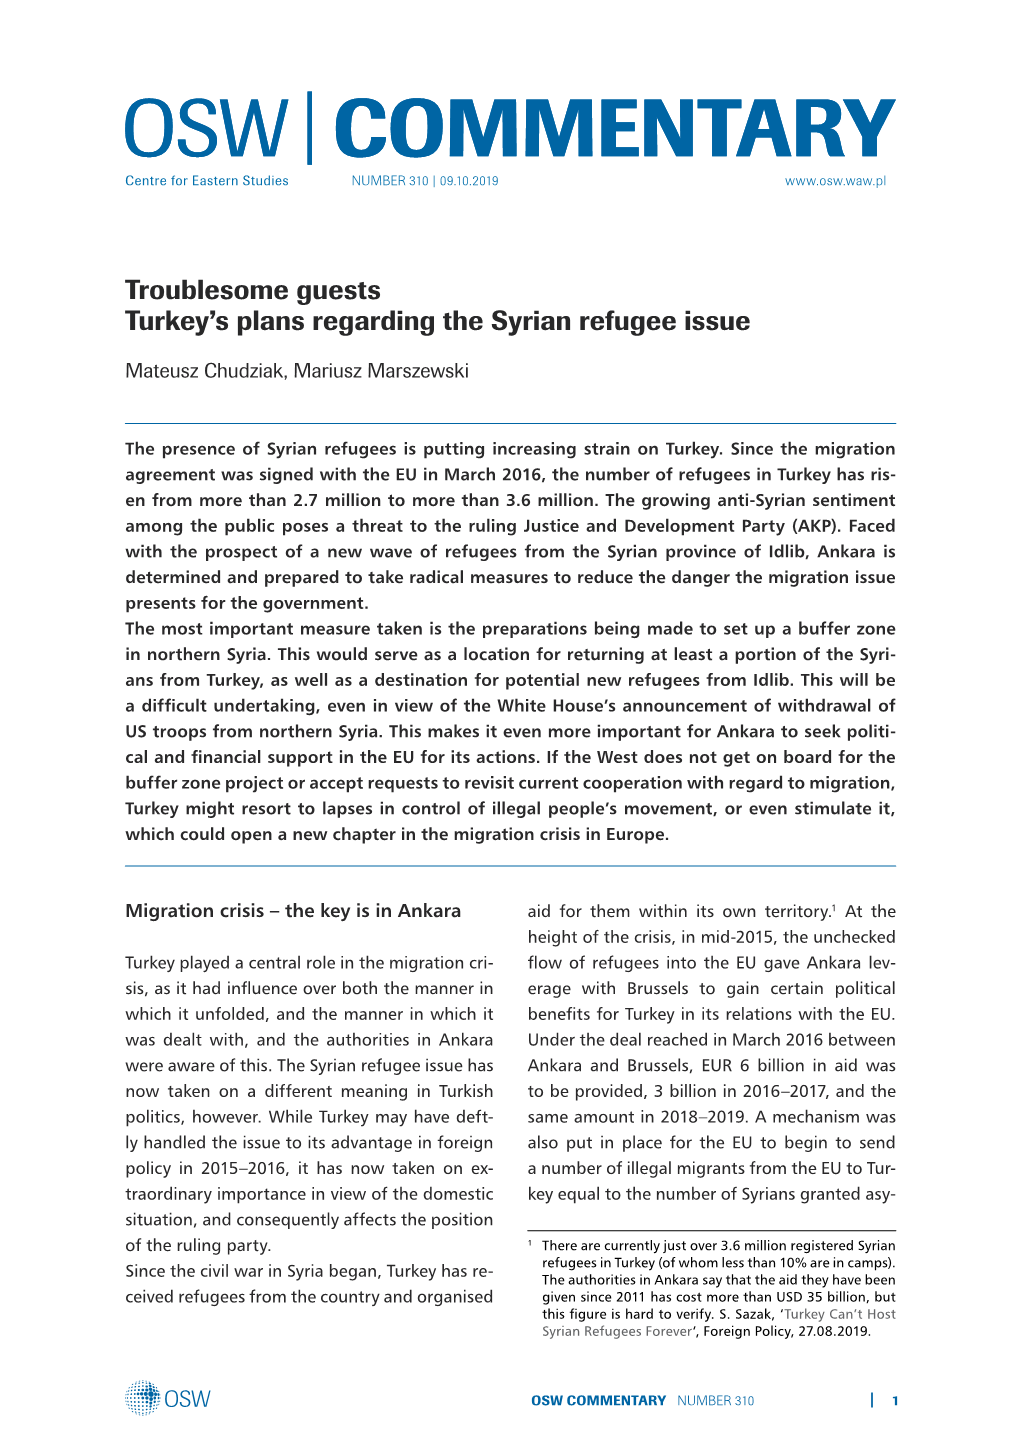 Troublesome Guests Turkey's Plans Regarding the Syrian Refugee Issue